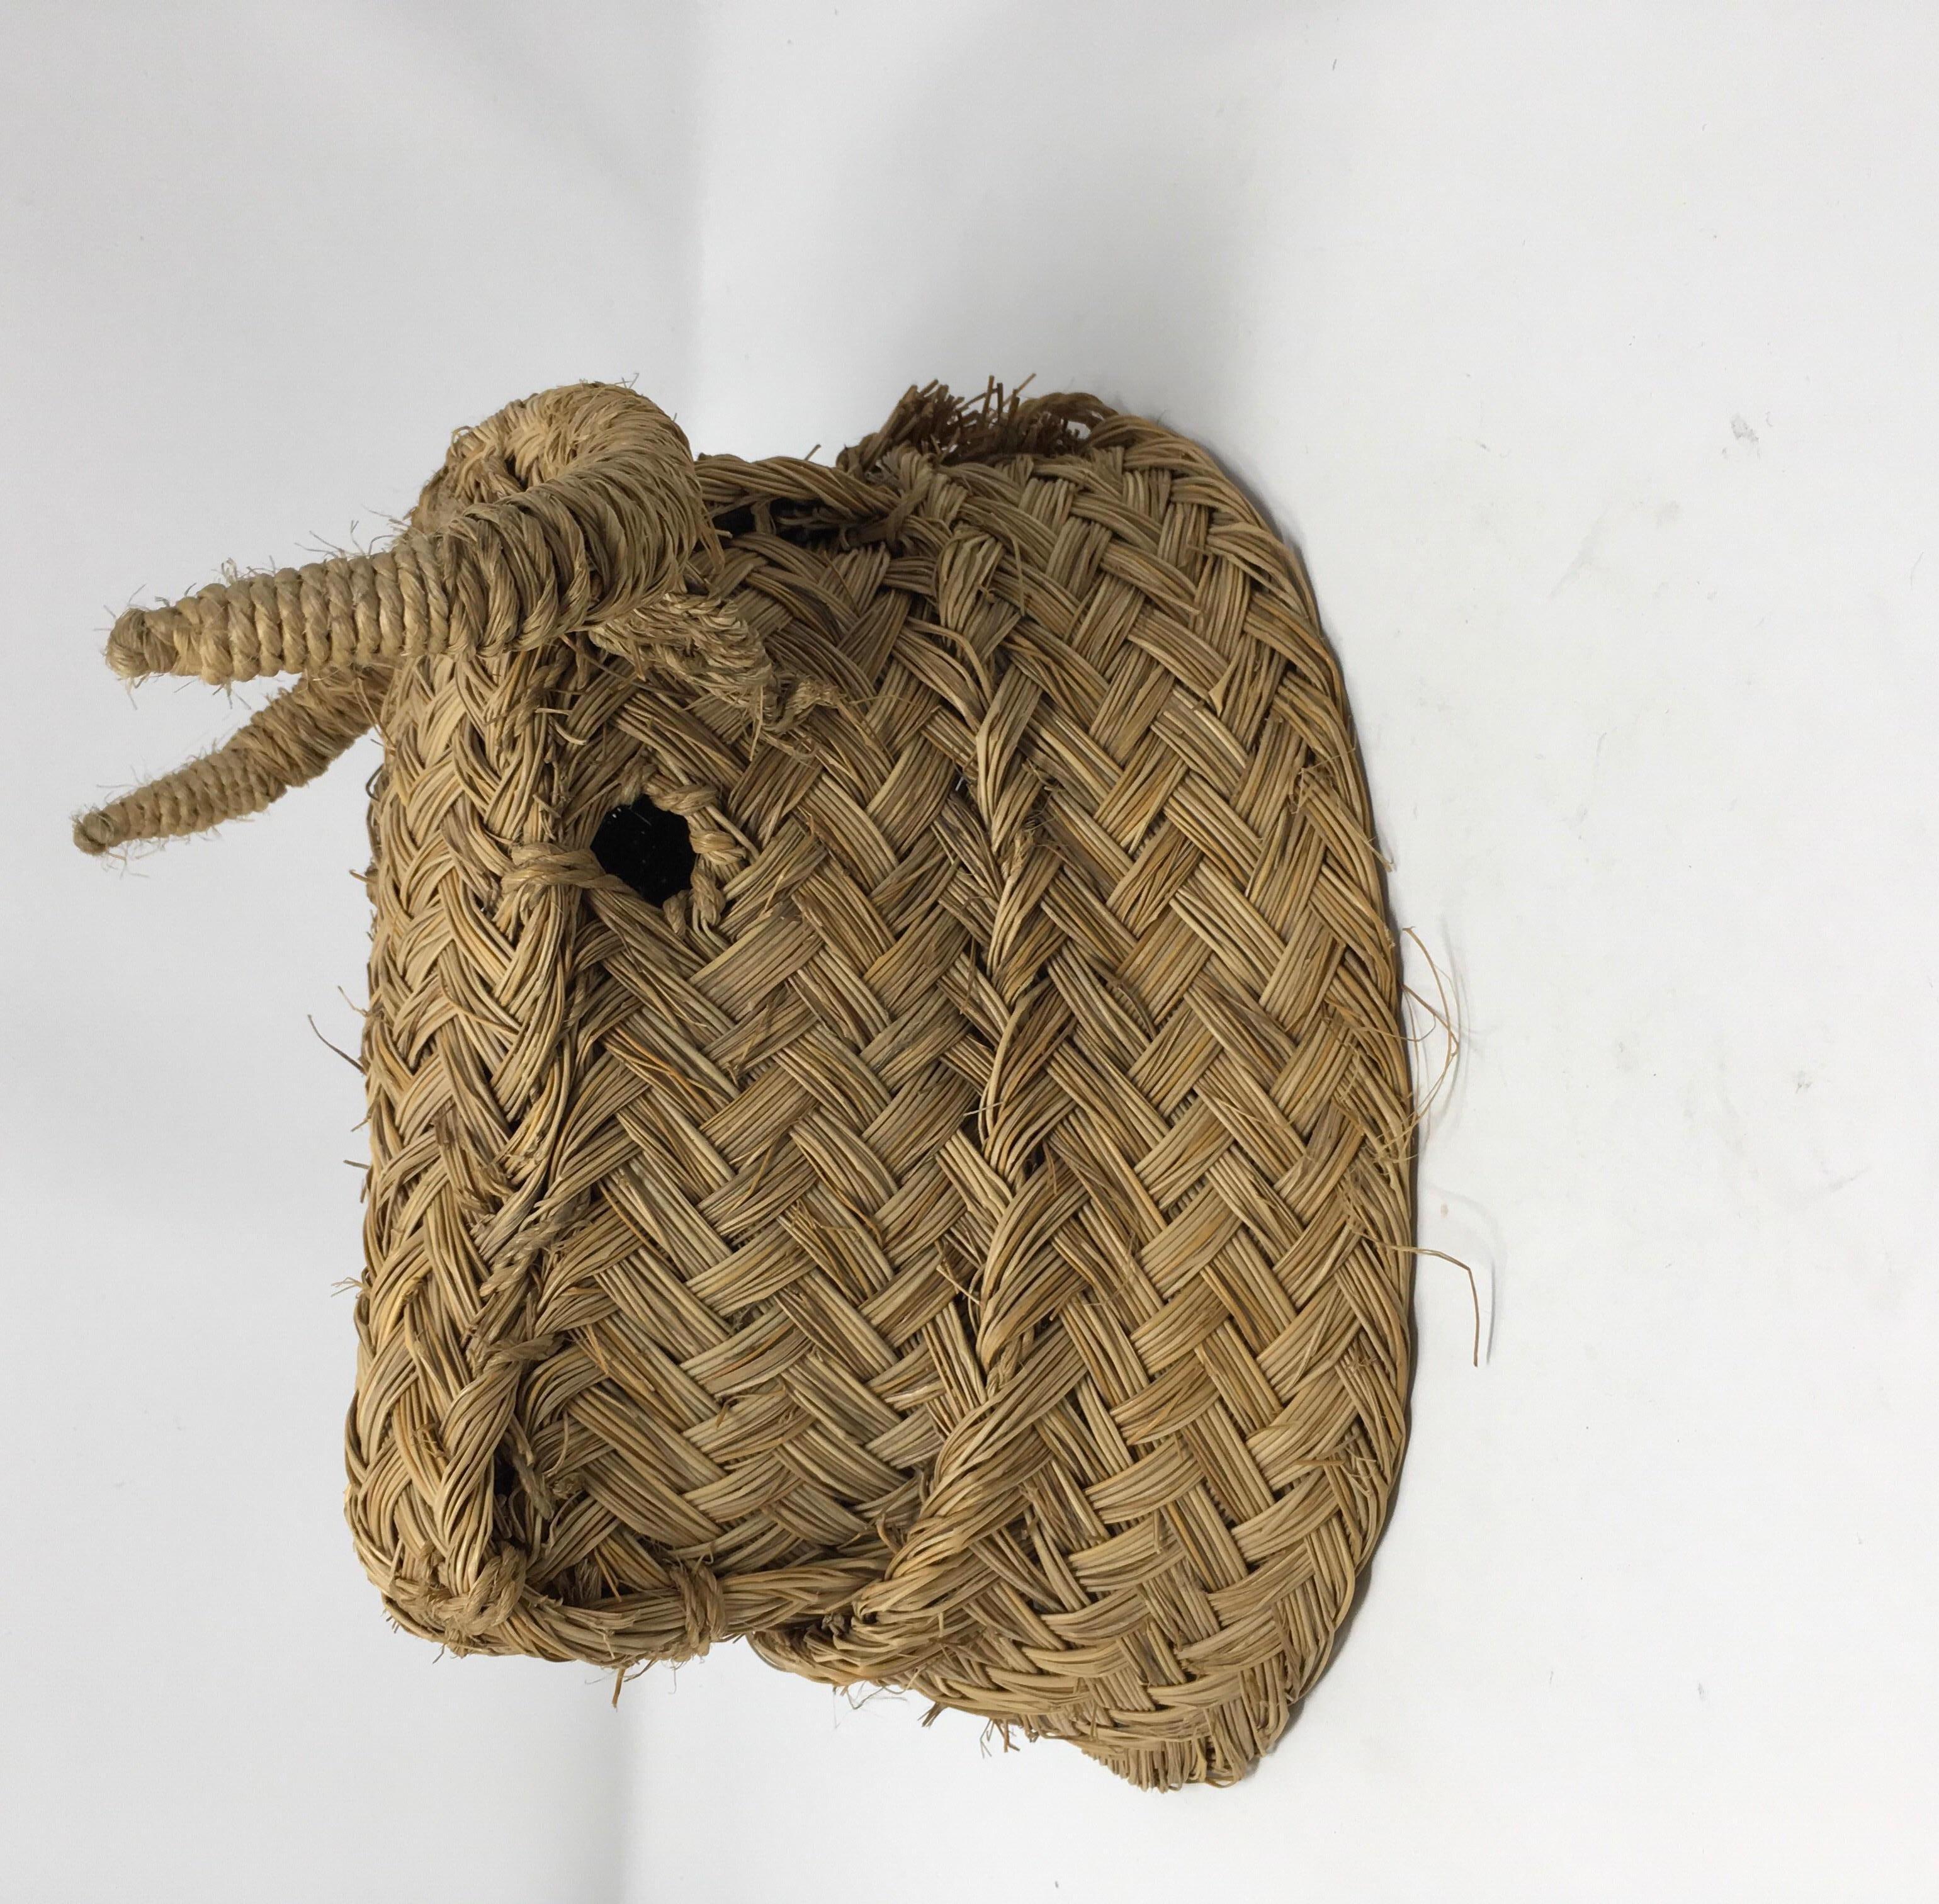 This charming, woven bulls head was handmade in Spain of esparto grass. It would look great at the end of a hallway, above a range or mixed in with other art on a gallery wall. These types of animal heads have been handwoven in Spain, since the